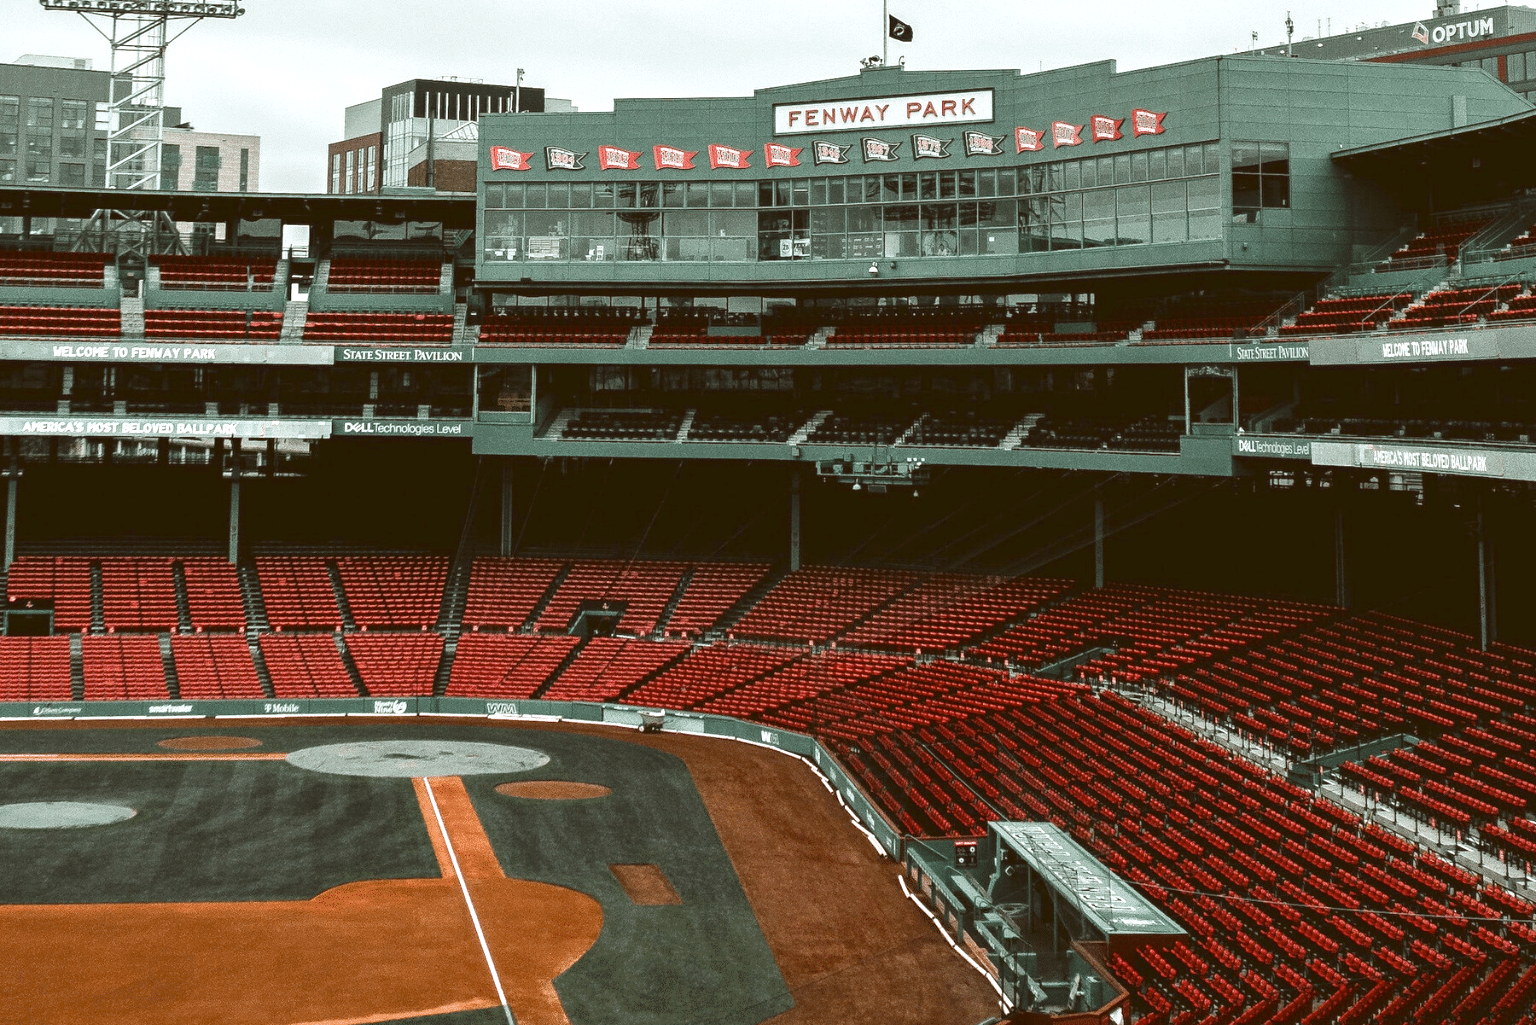 110-Year-Old Fenway Park Is the MLB's First to Go Carbon Neutral